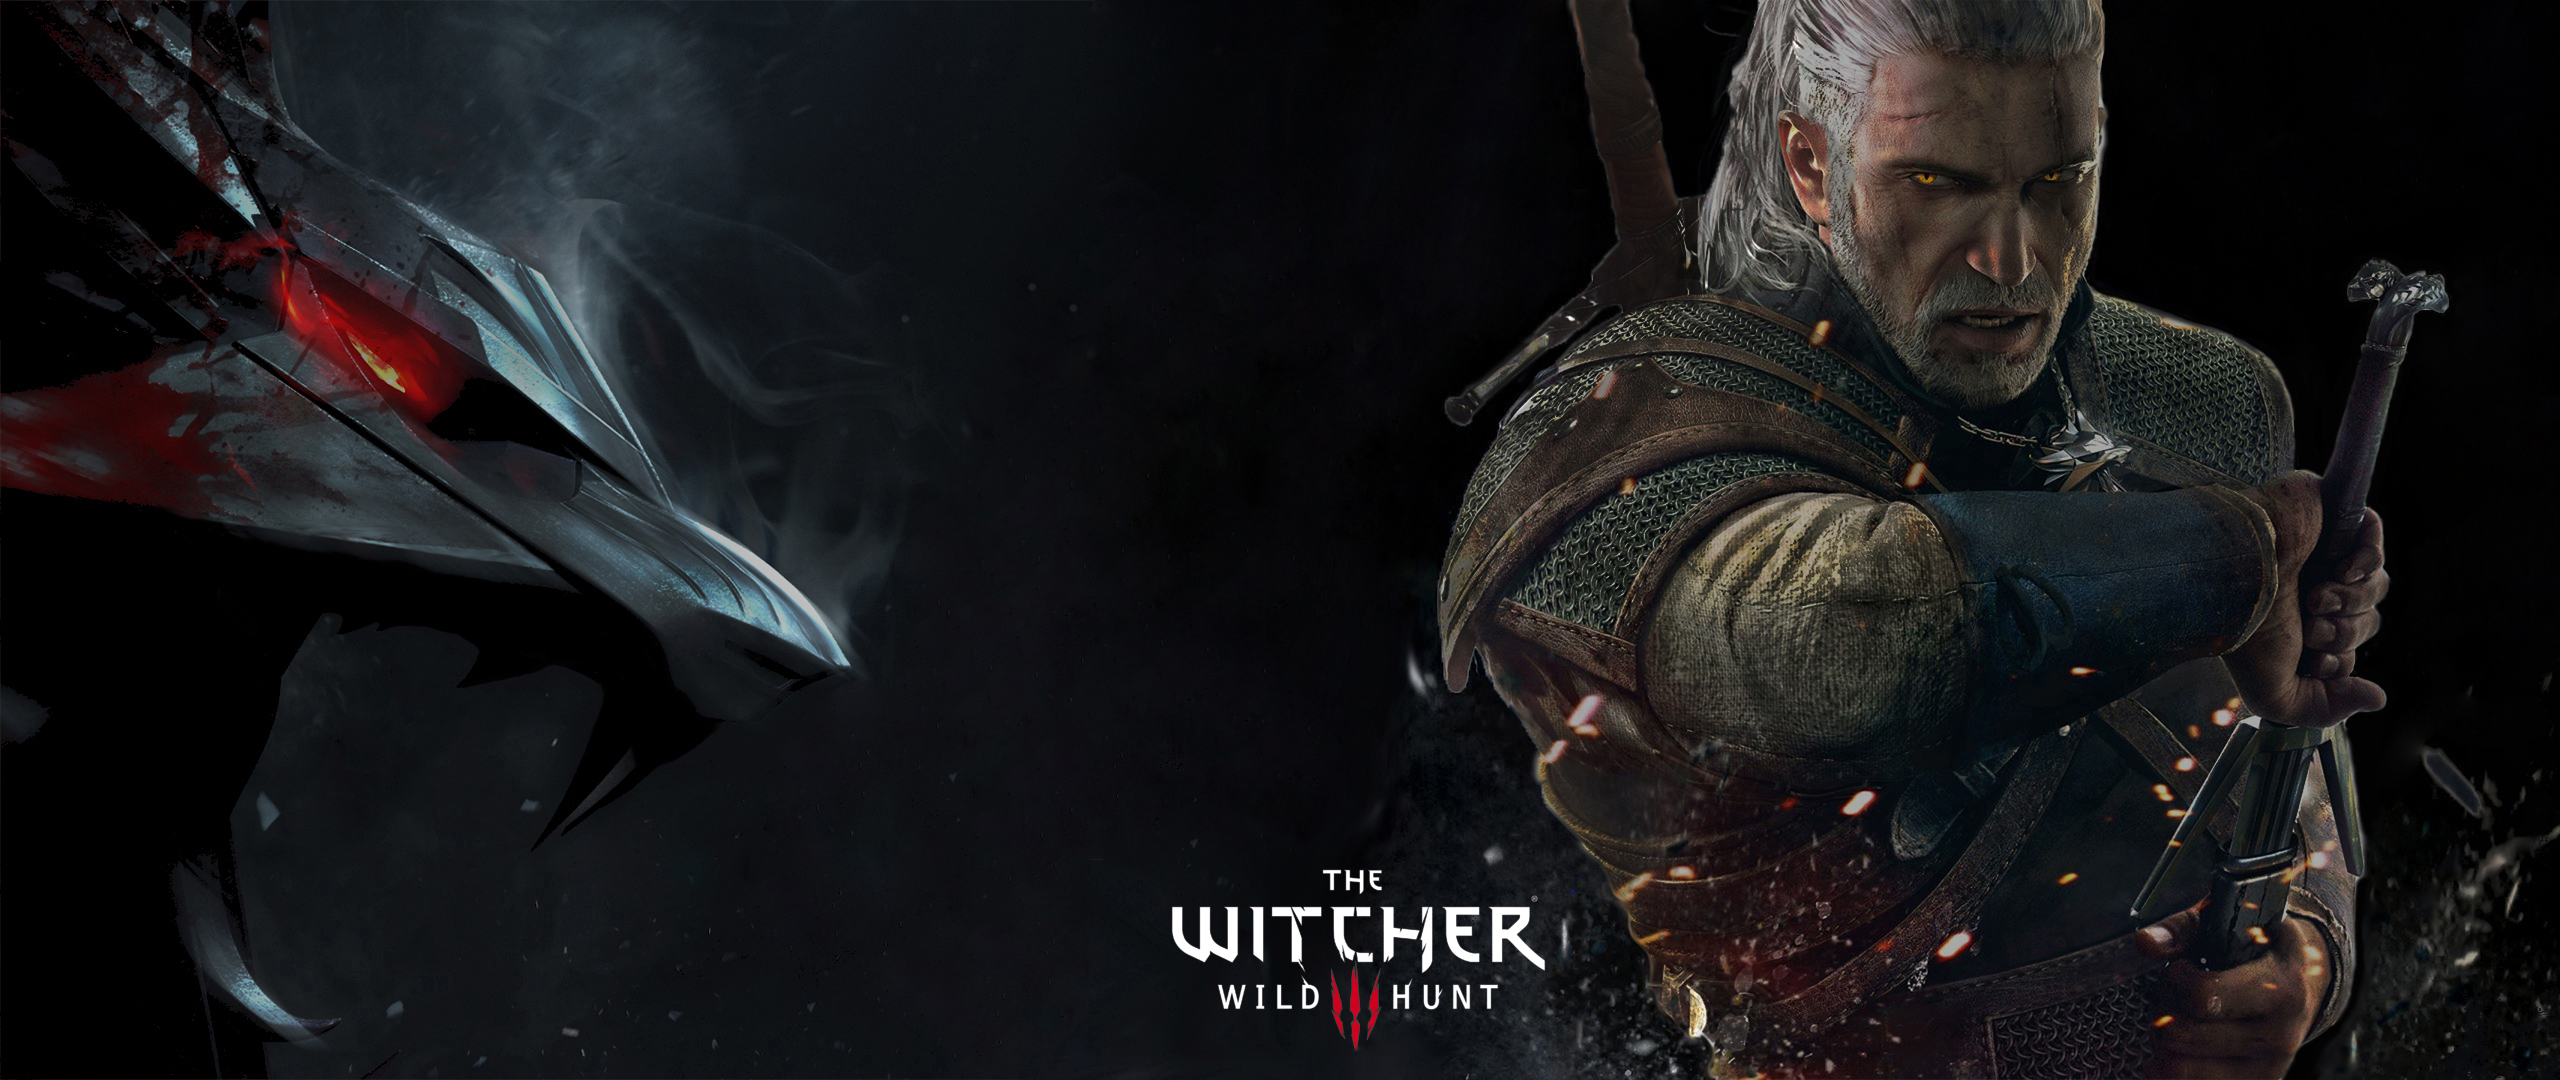 Witcher Wallpaper By Beni96